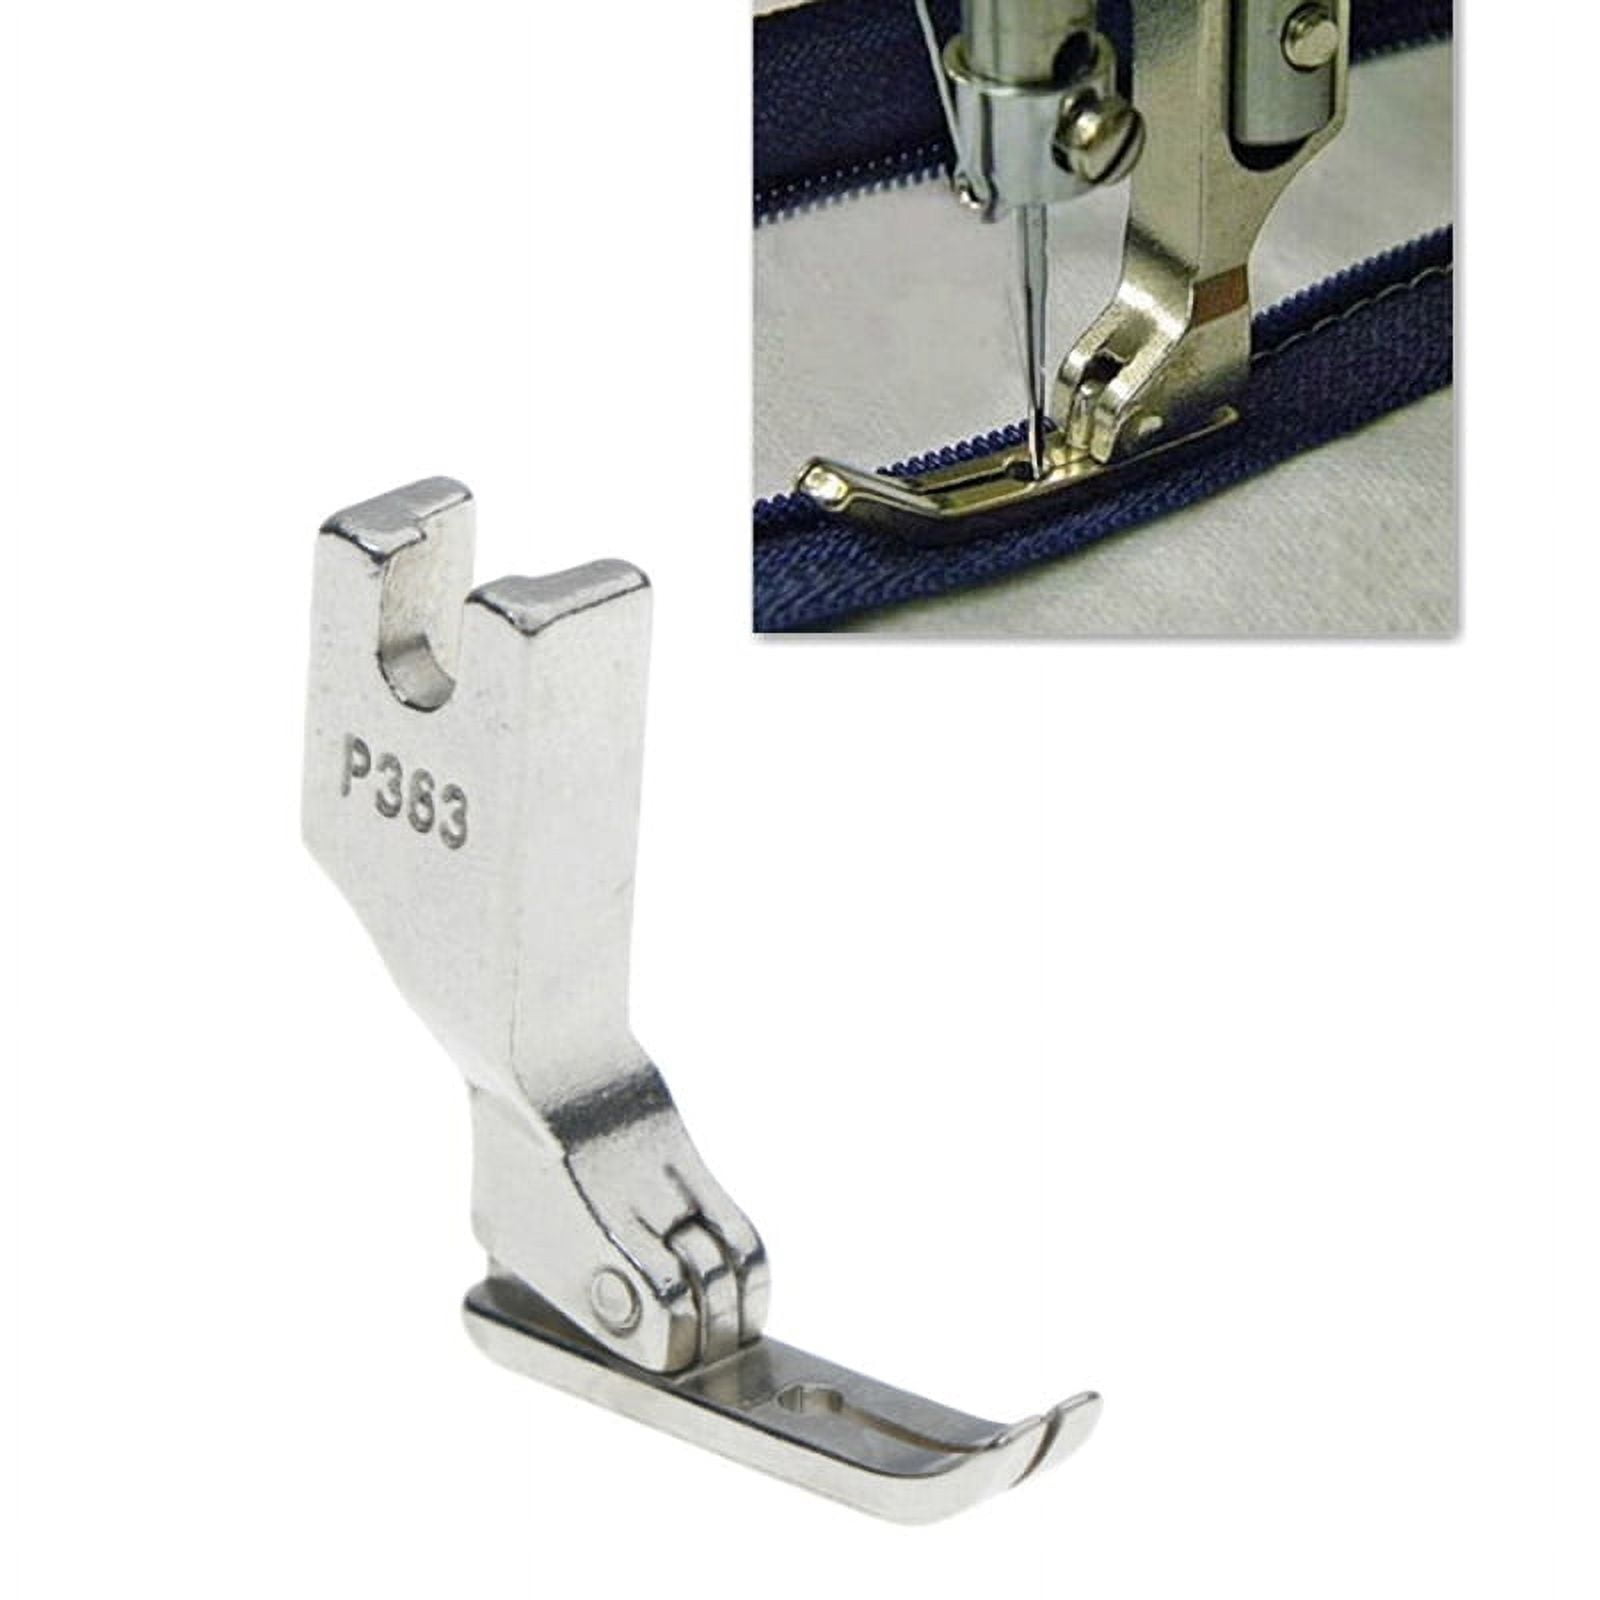 Narrow Snap-On Zipper Foot #sa208 for Brother Home Sewing Machine